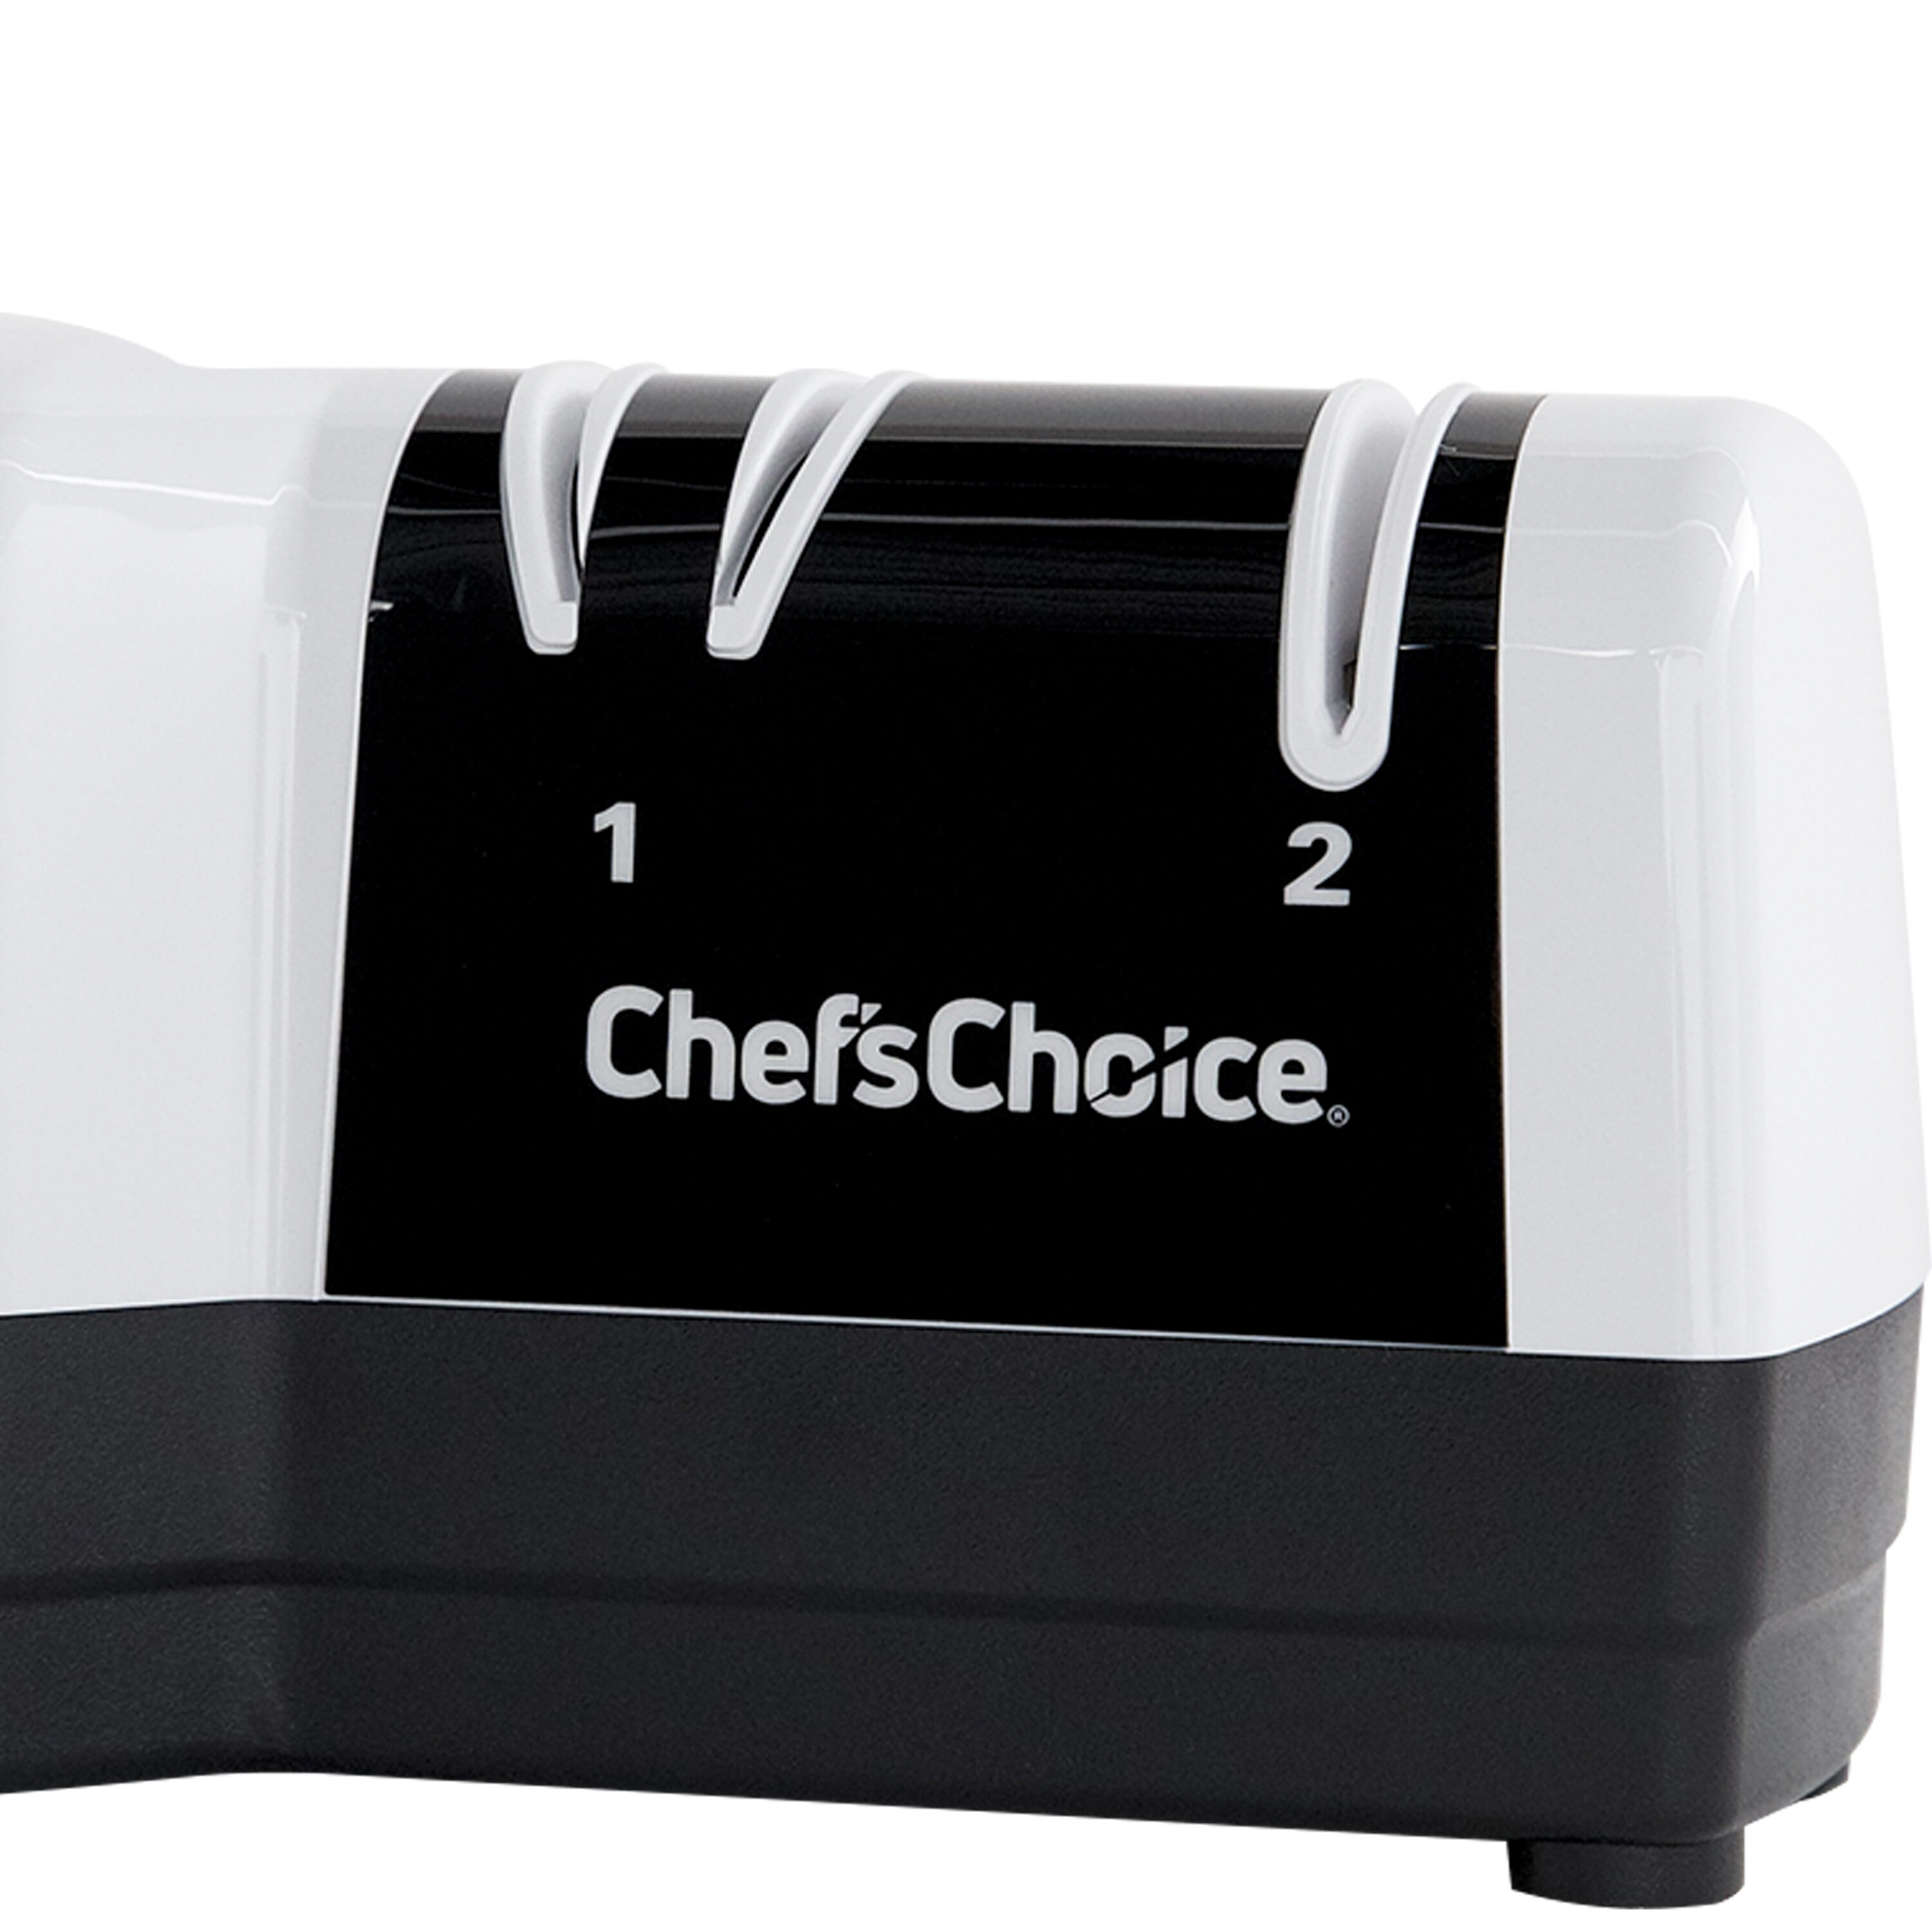 Easily apply razor-sharp edges with advanced Hybrid® technology from Chef'sChoice®.  This new and efficient Hybrid® 220 sharpener combines electric and manual  CrissCross® advanced sharpening technology for an extremely sharp,  burr-free edge with